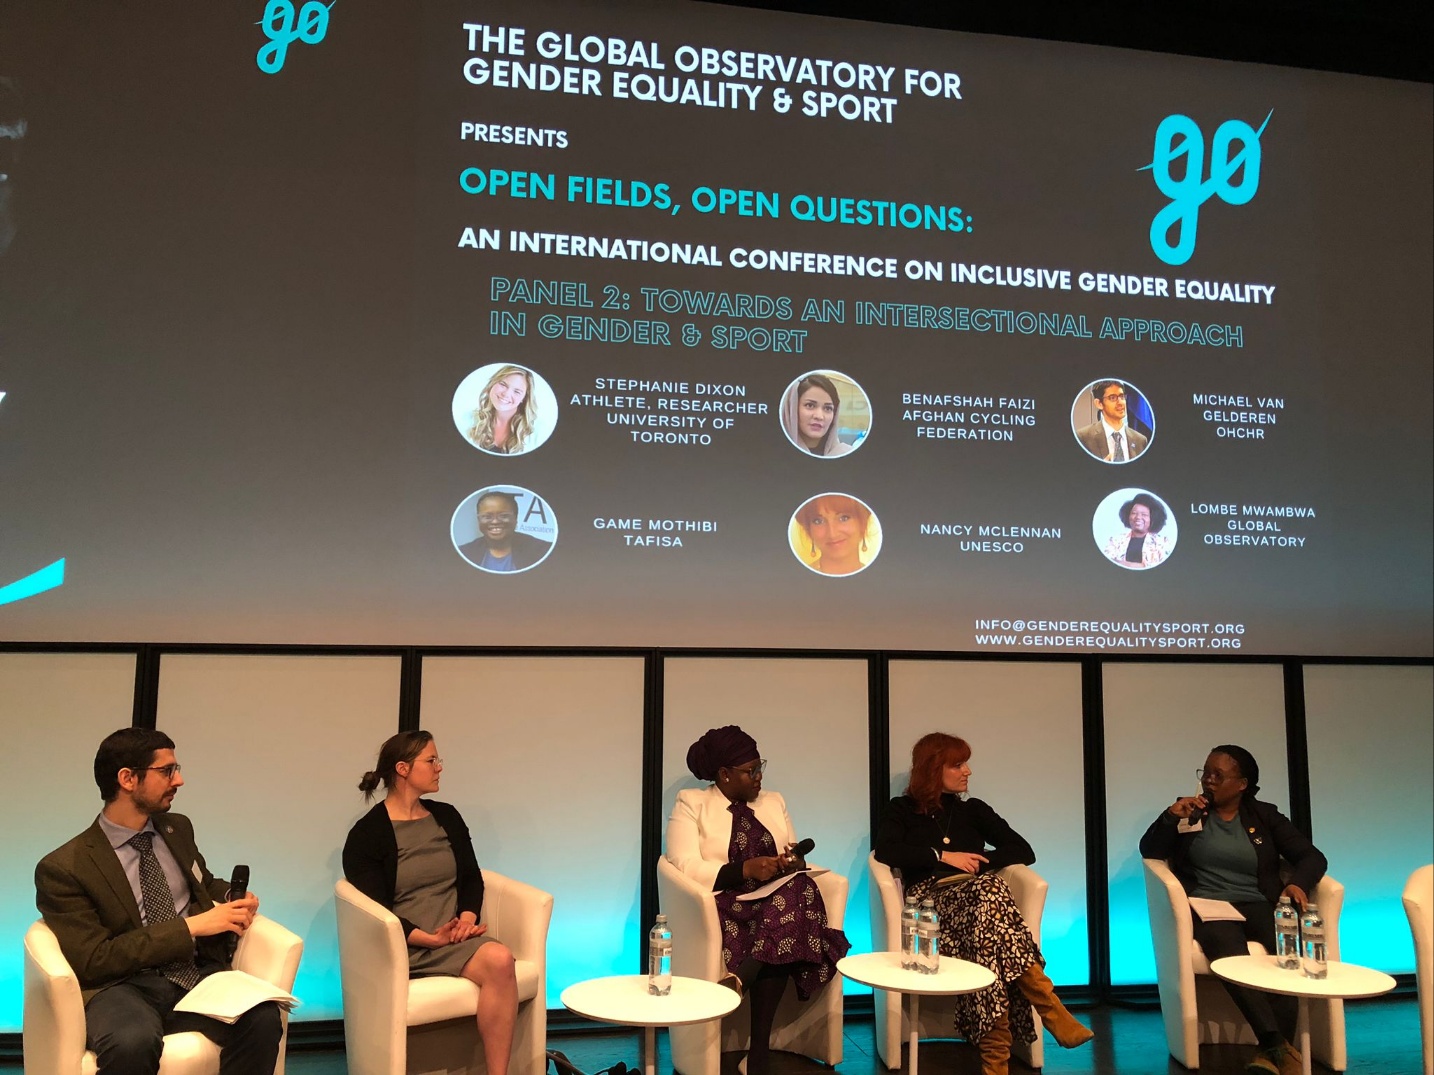 A group of Activists at the Global Observatory for Gender Equality & Sport's 